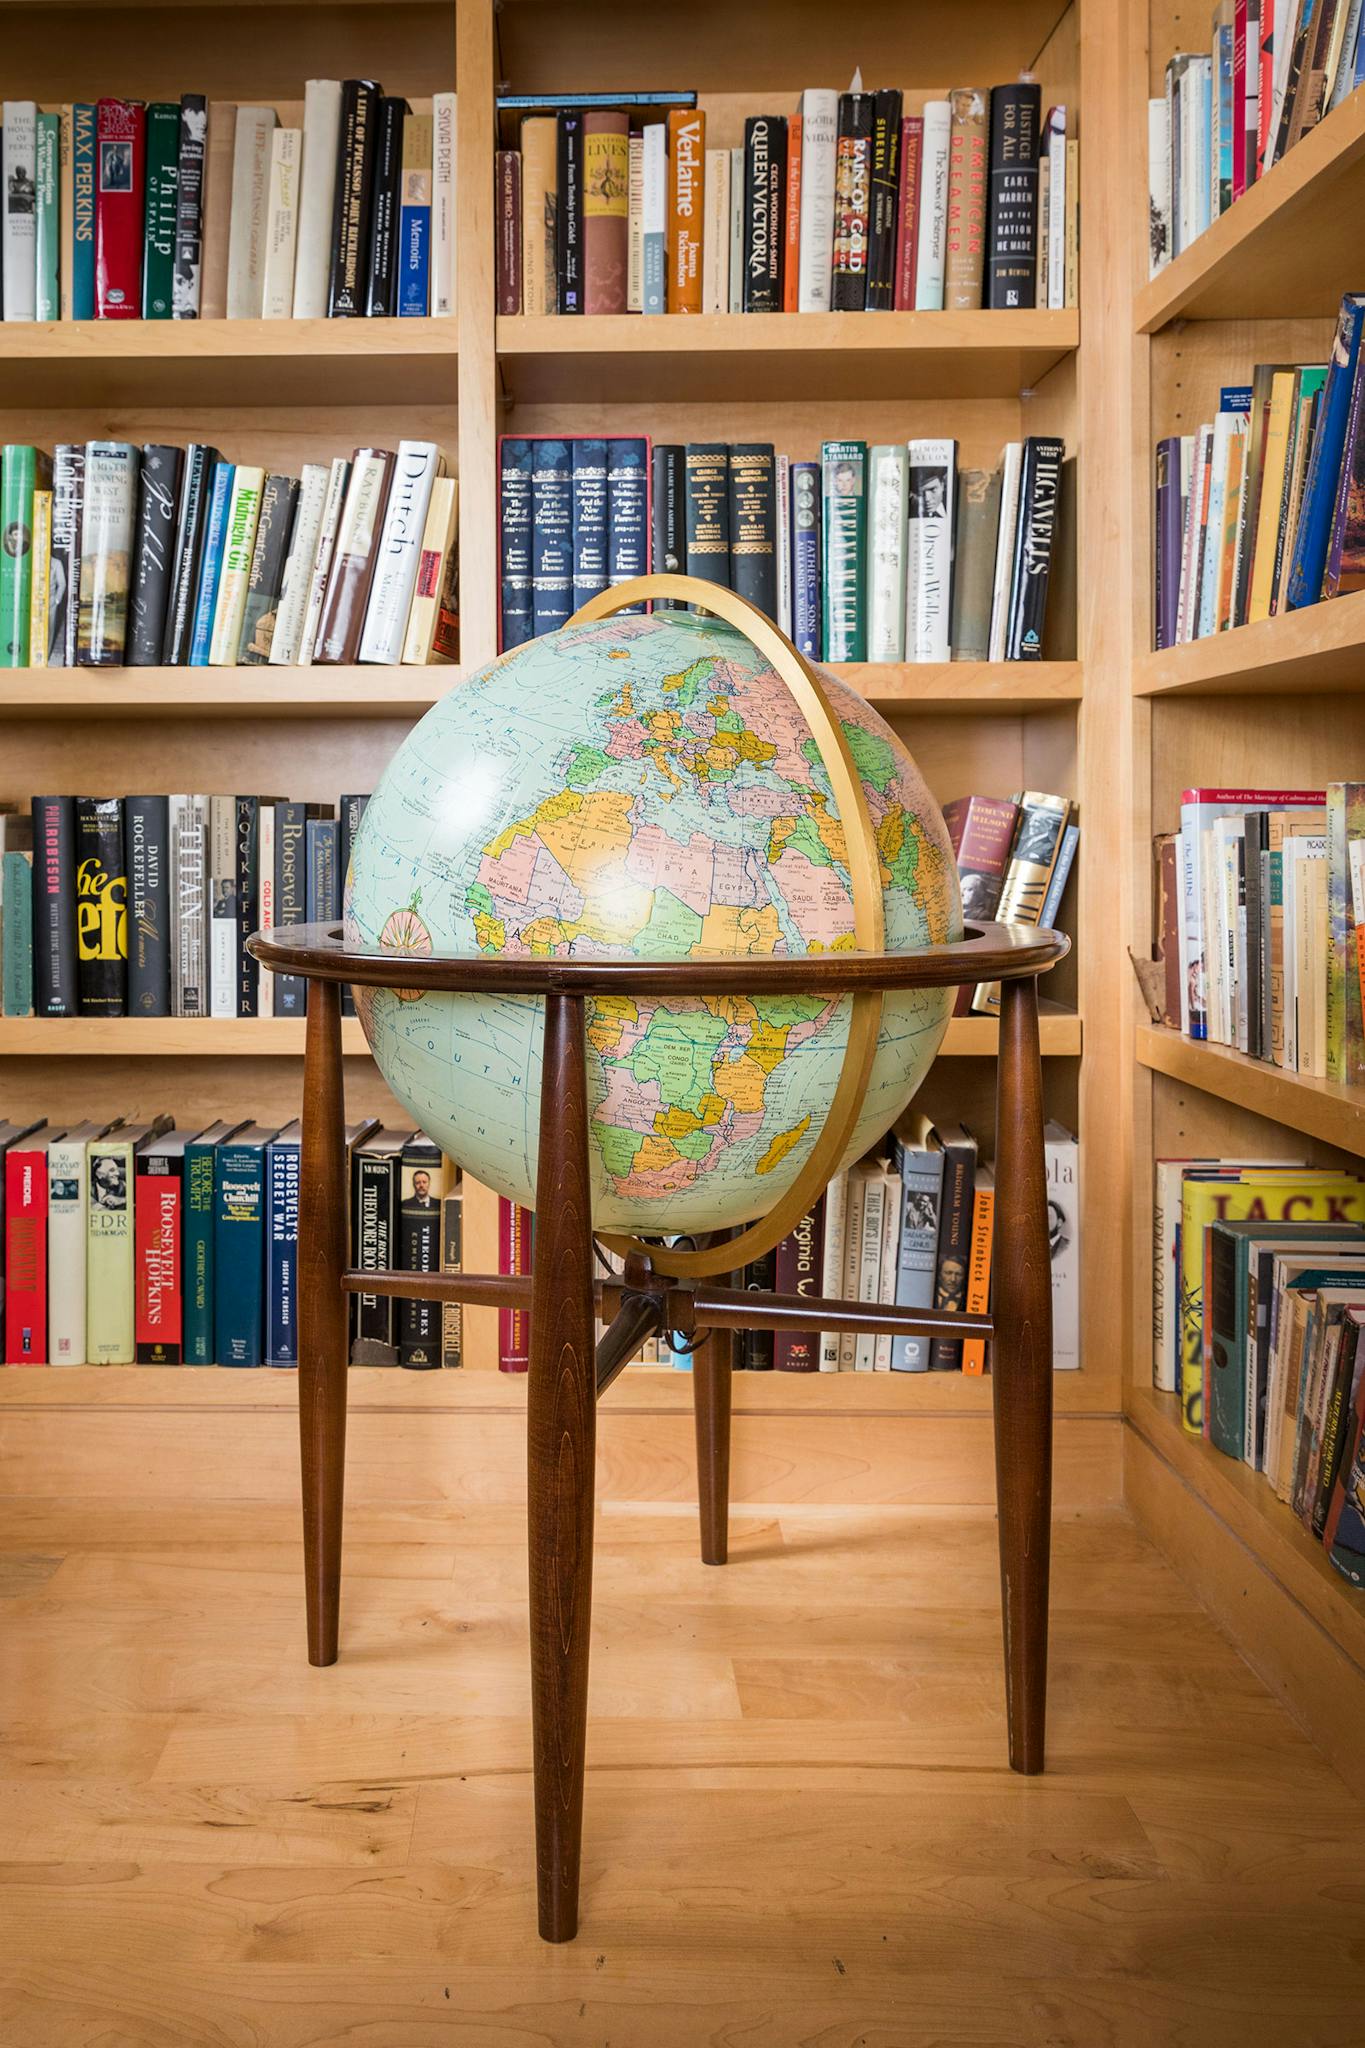 A globe in Melba Whatley's home library in Austin